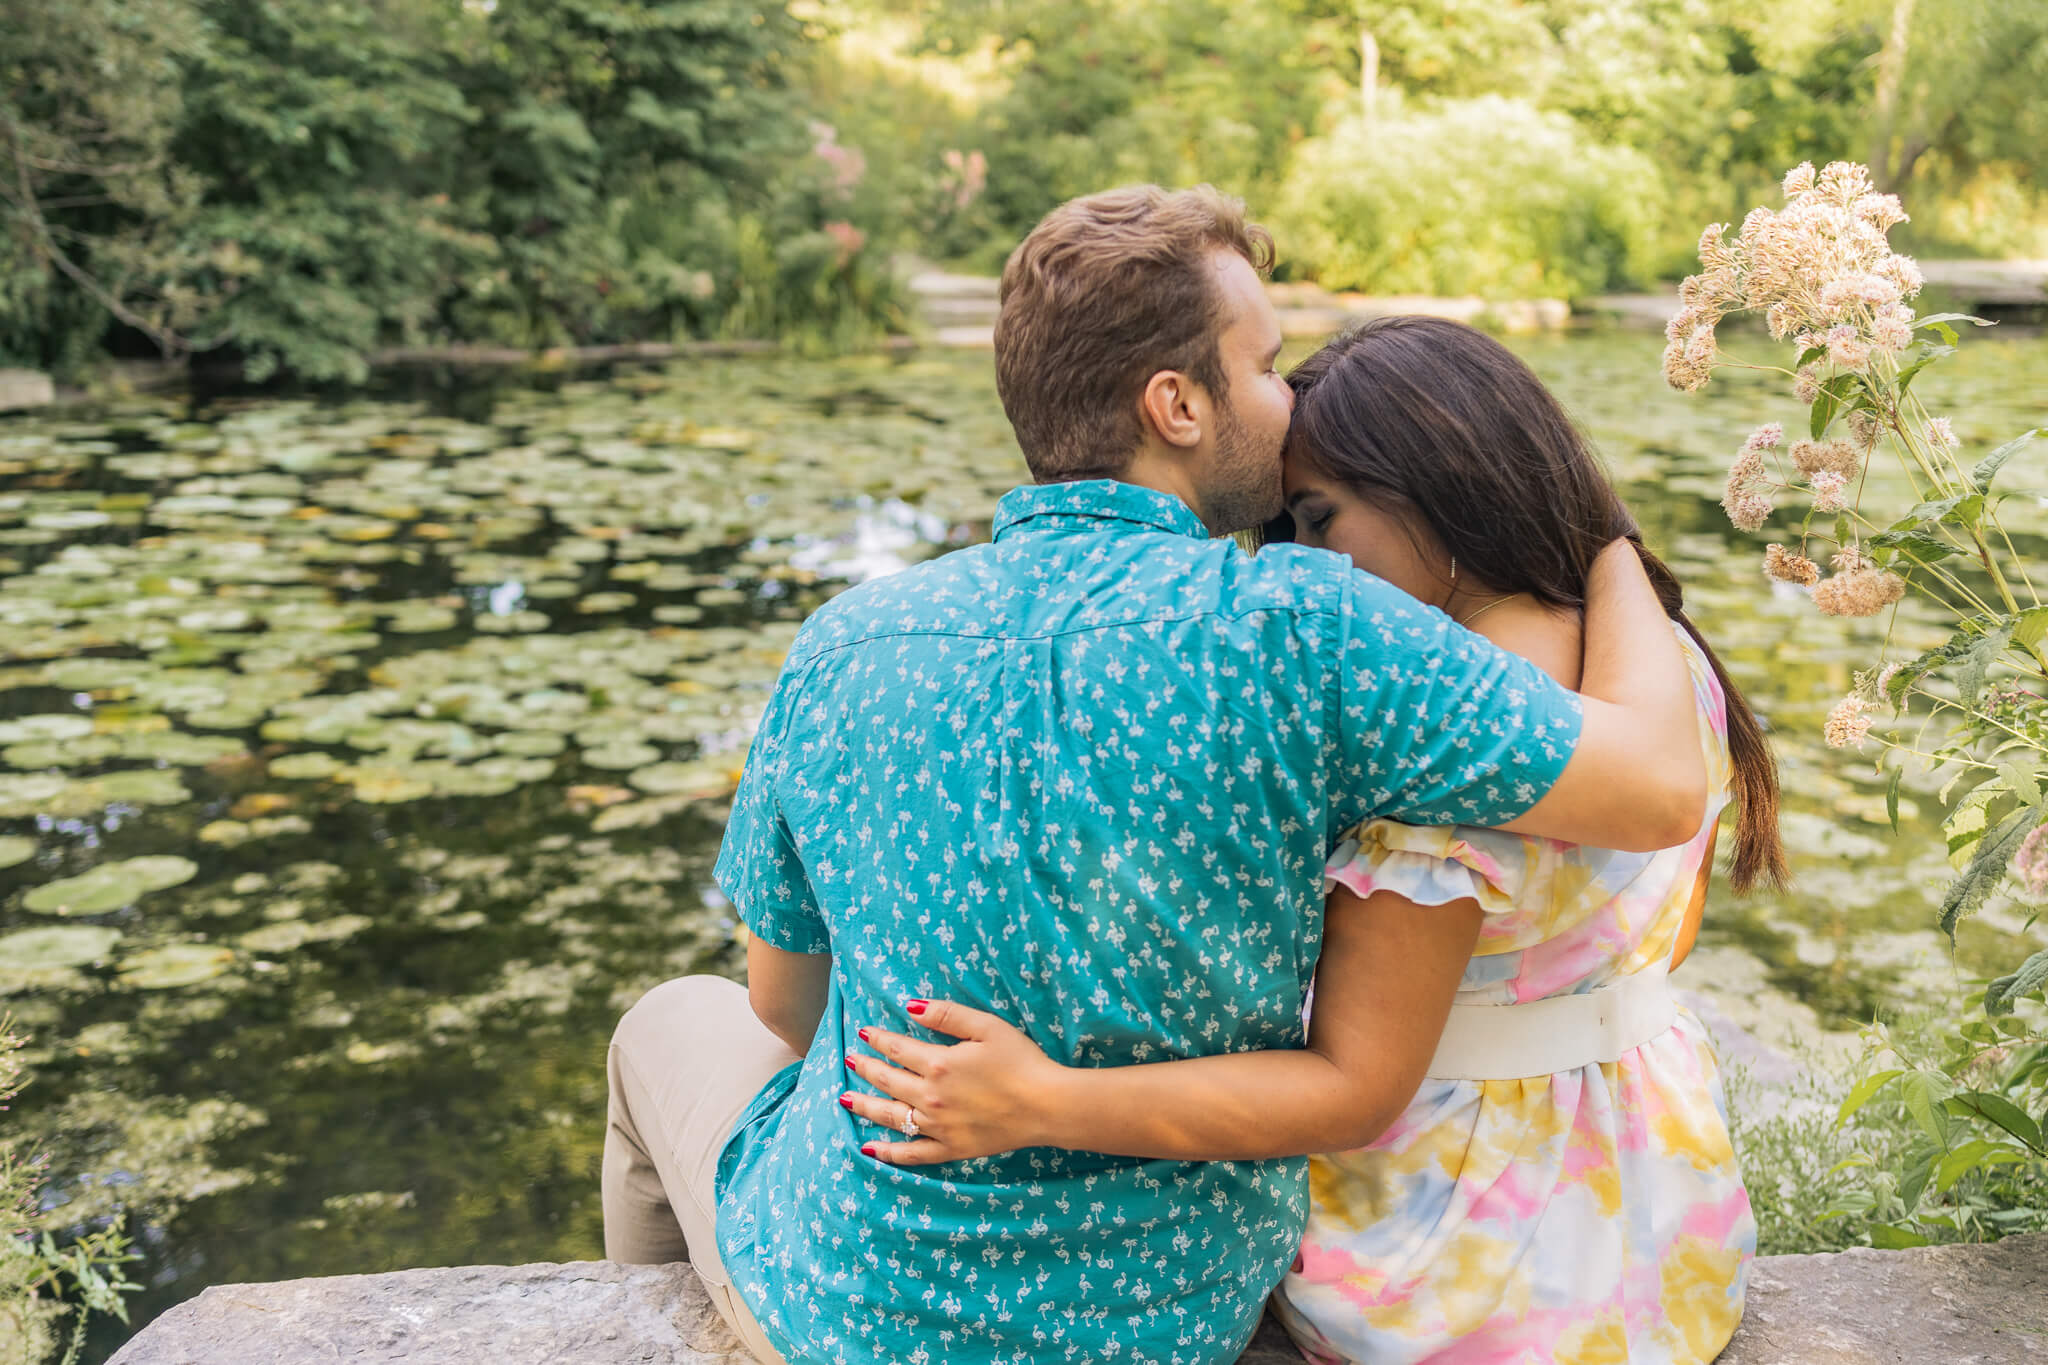 A man kisses a woman on the head. We see their backs as they face the expansive magical garden of Chicago's Lily Pool.